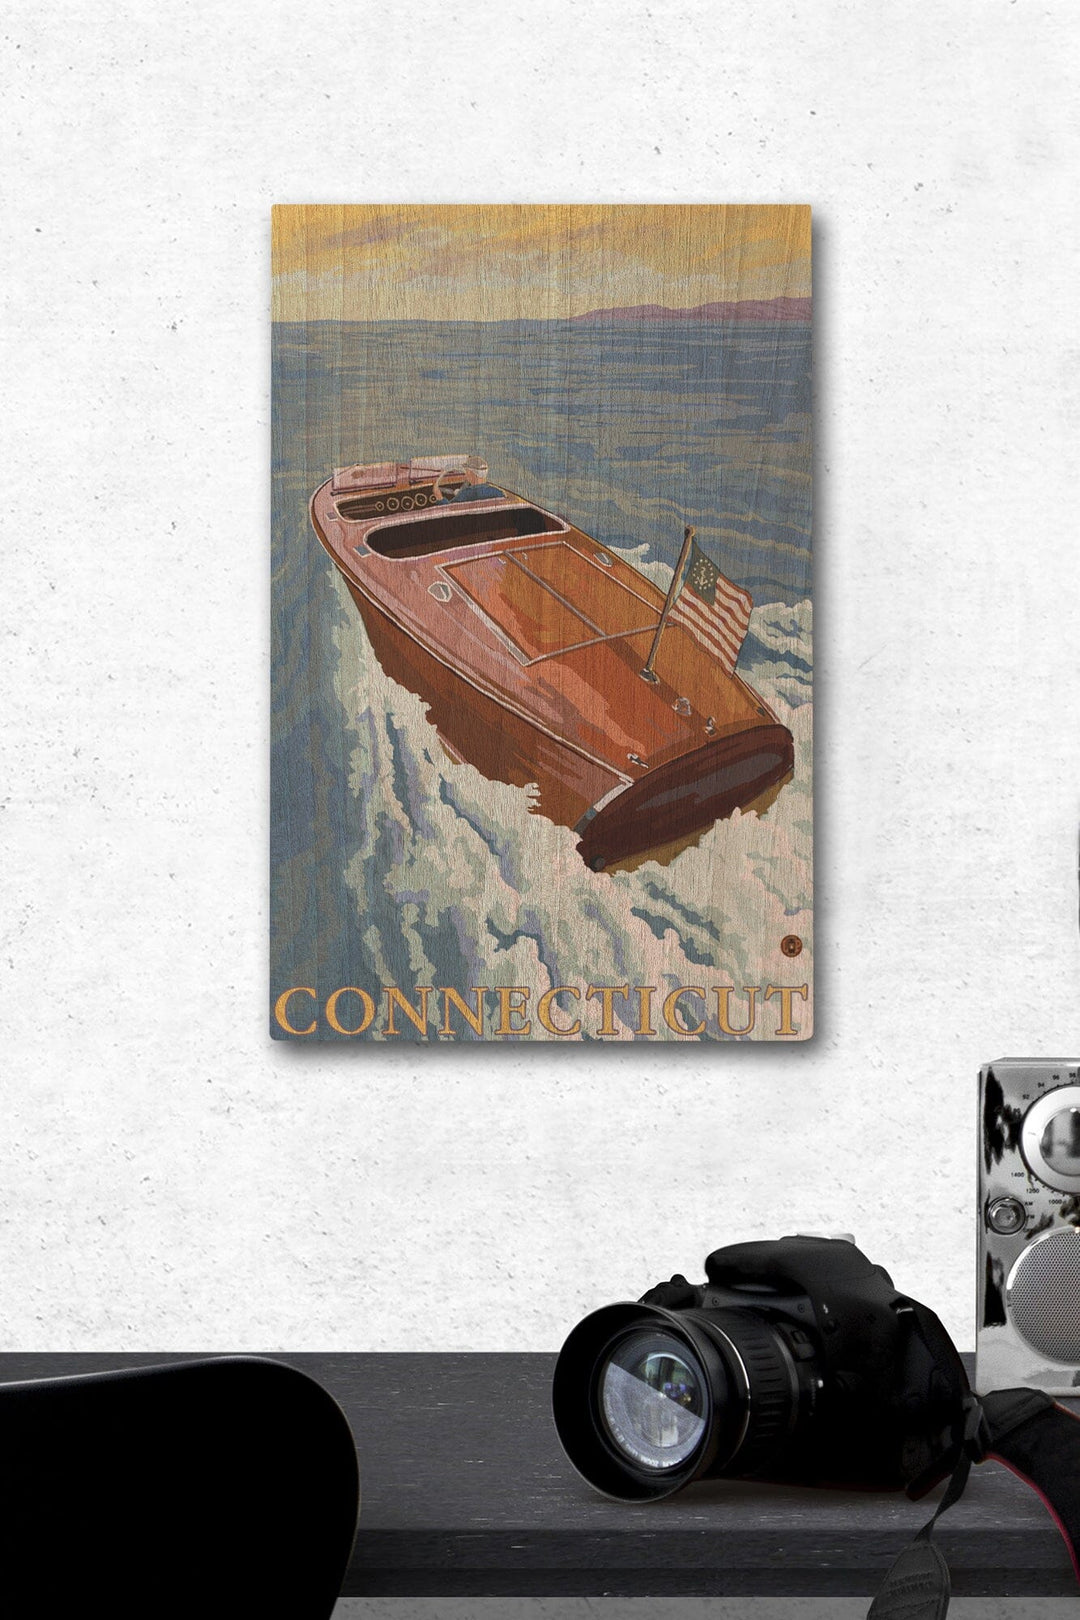 Connecticut, Wooden Boat, Lantern Press Artwork, Wood Signs and Postcards Wood Lantern Press 12 x 18 Wood Gallery Print 